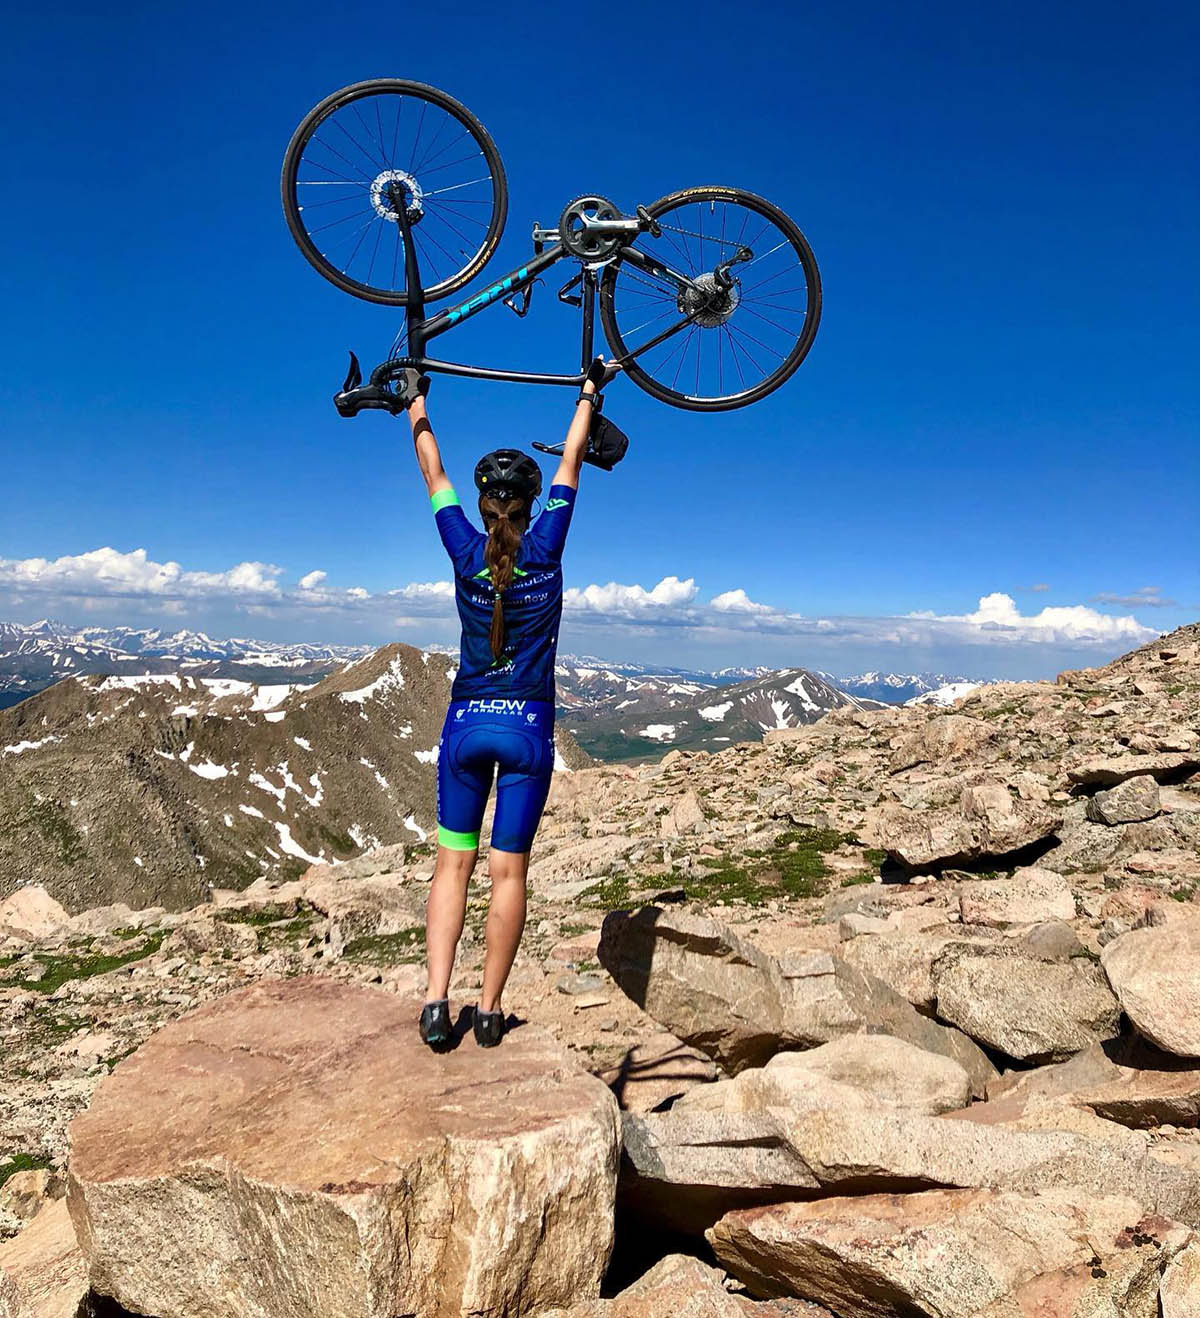 A biker stands majestically atop high-mountain rocks, holding her bike over her head as a sign of triumphant accomplishment.